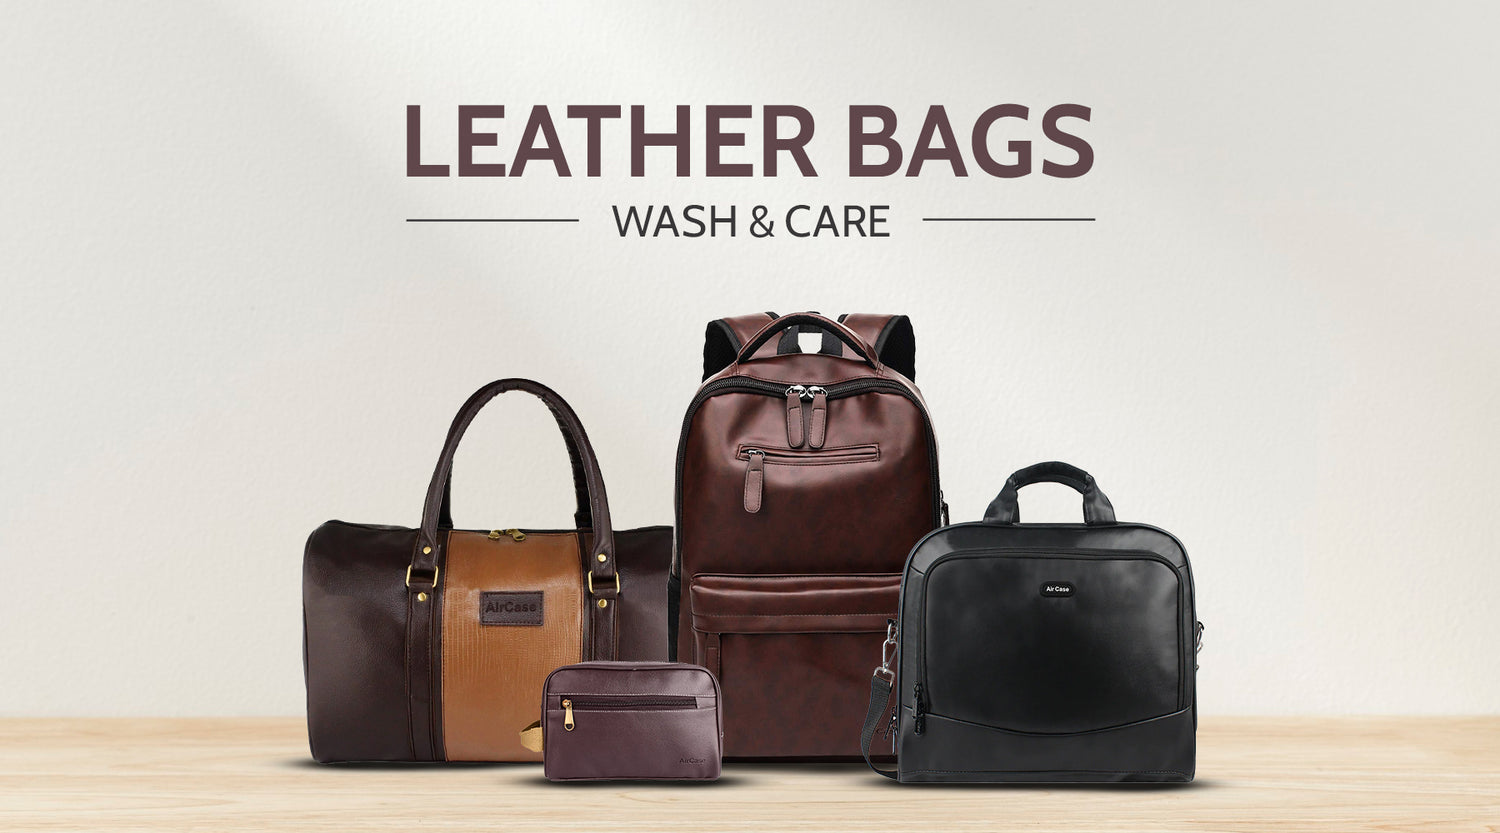 How to clean Leather bags